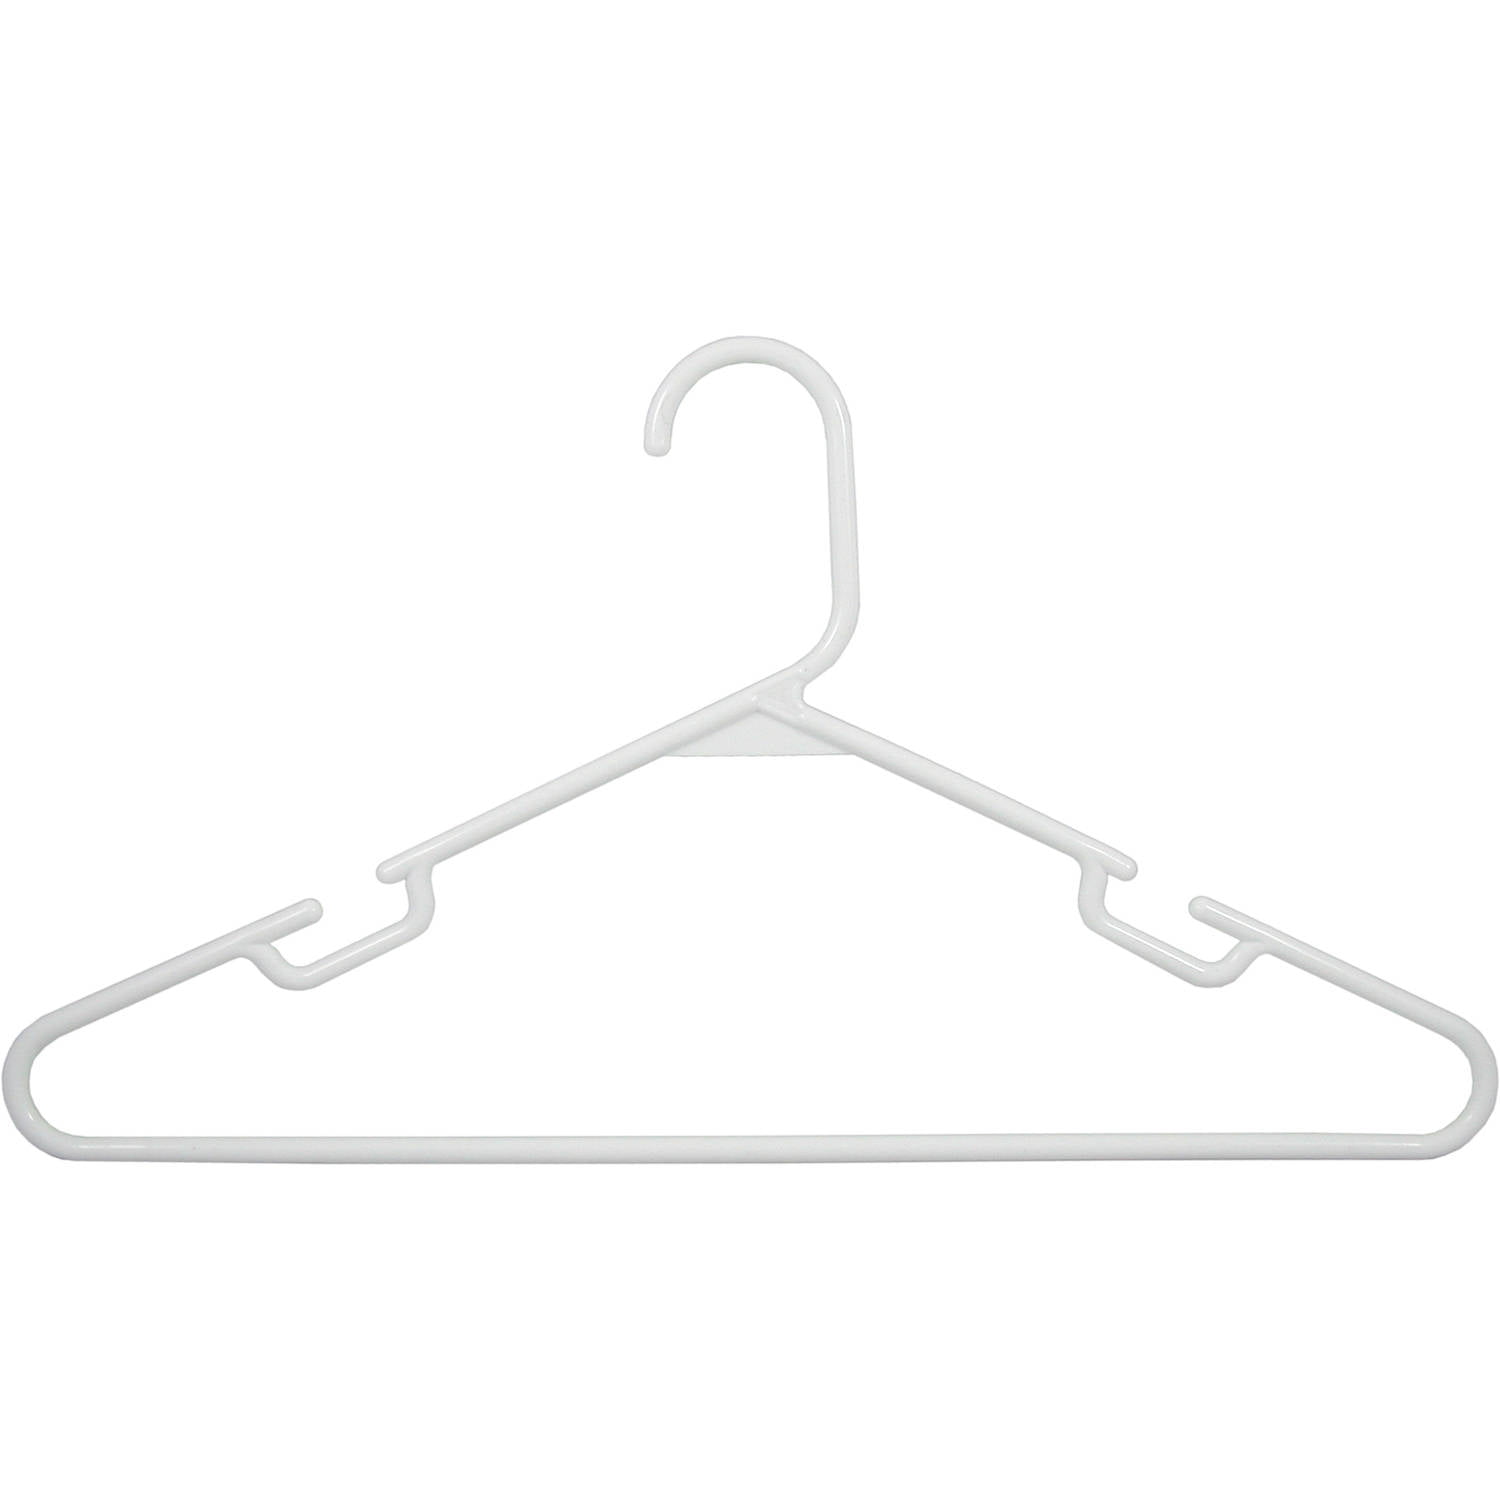  Wisconic Kids Hangers - Pack of 60 - Small Clothing